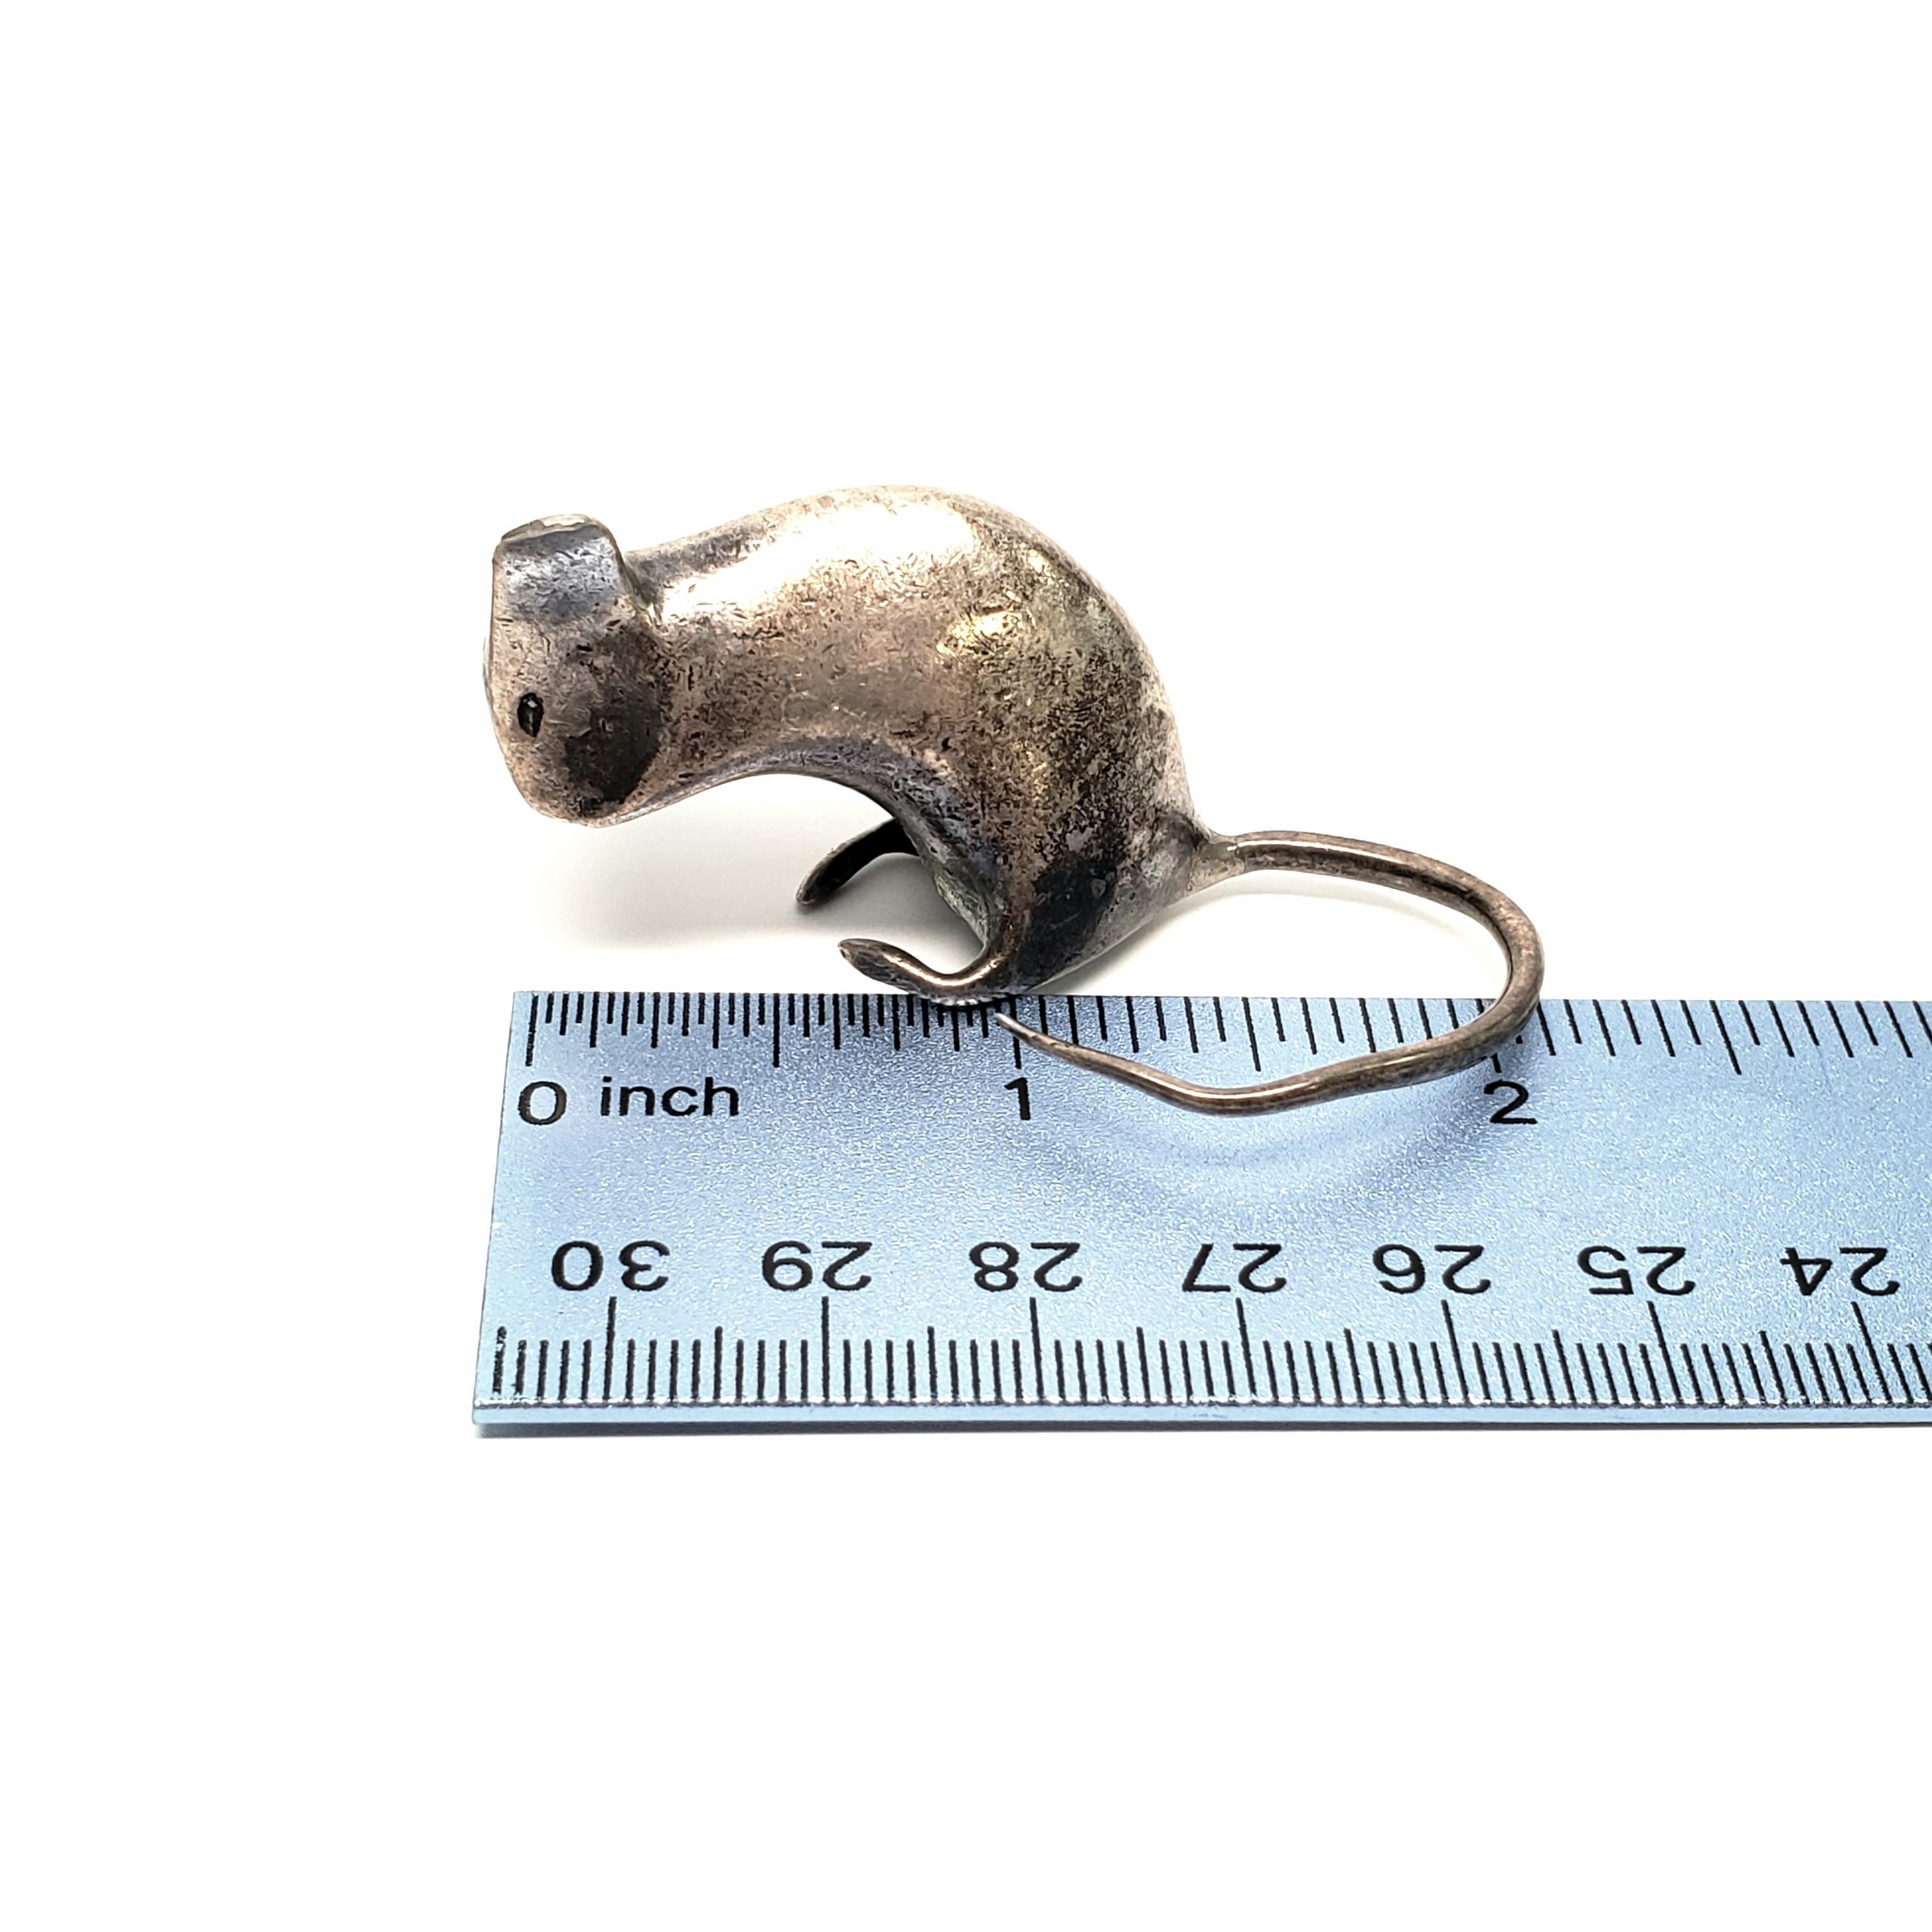 Tiffany & Co. Sterling Silver Mouse Figurine or Paperweight 2